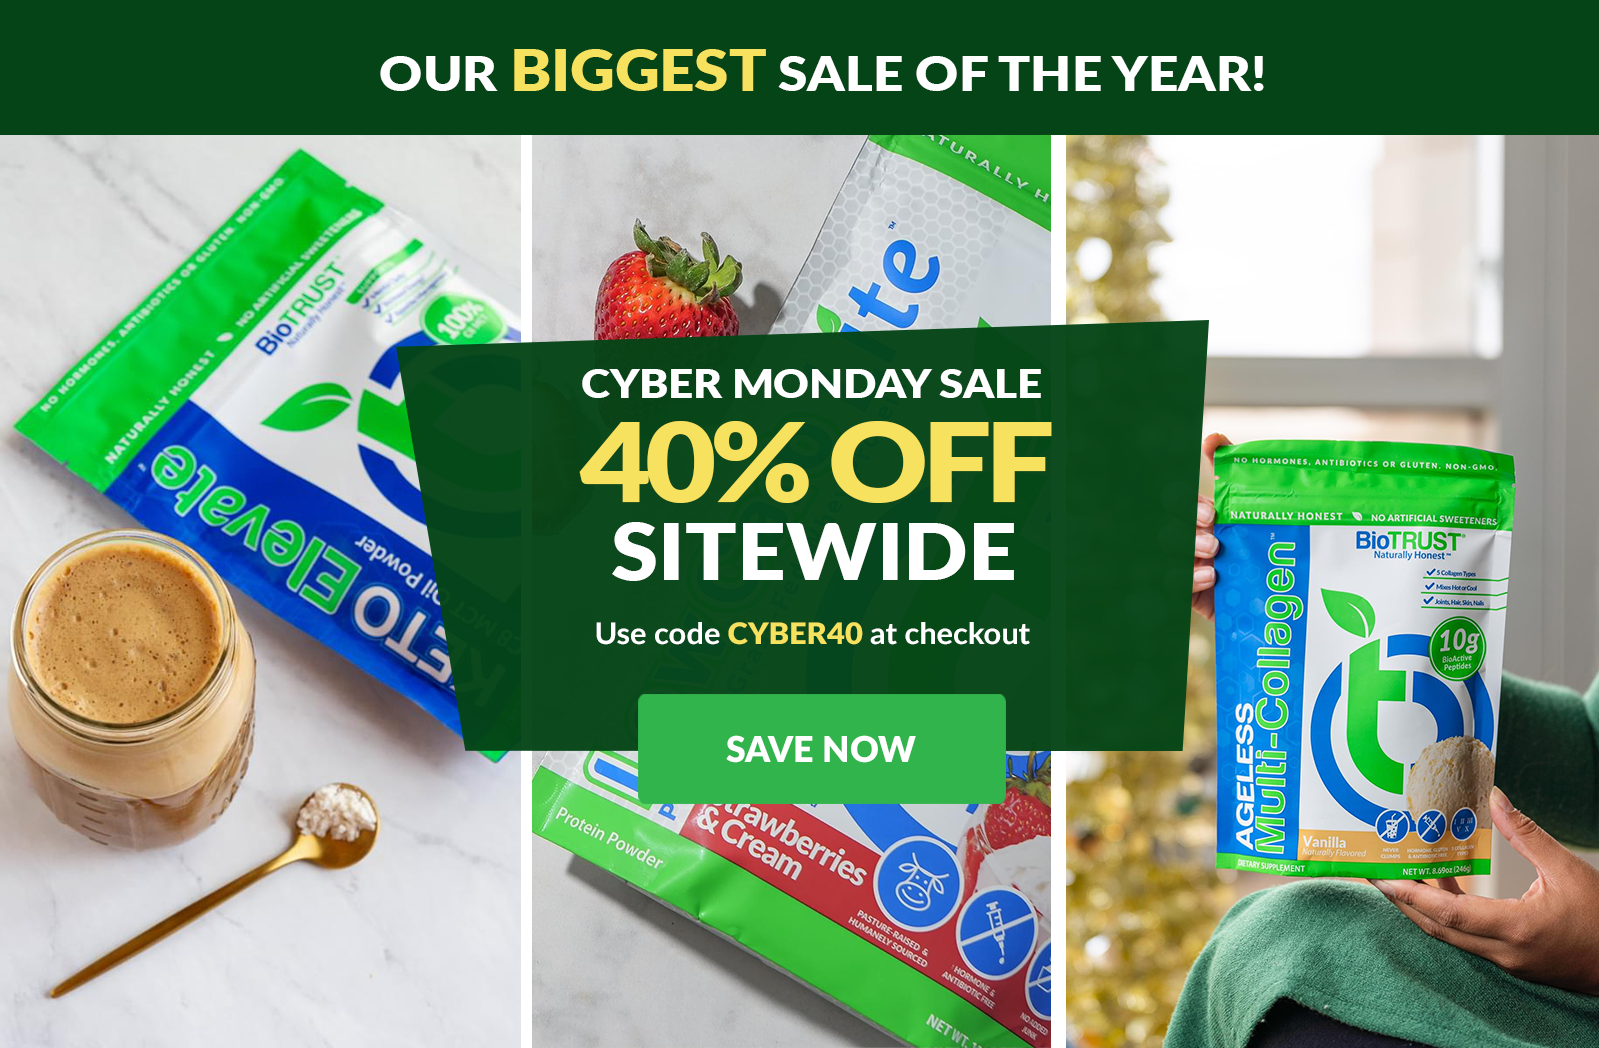 LIMITED TIME: Save 40% sitewide with code CYBER40 - no limits or minimums!